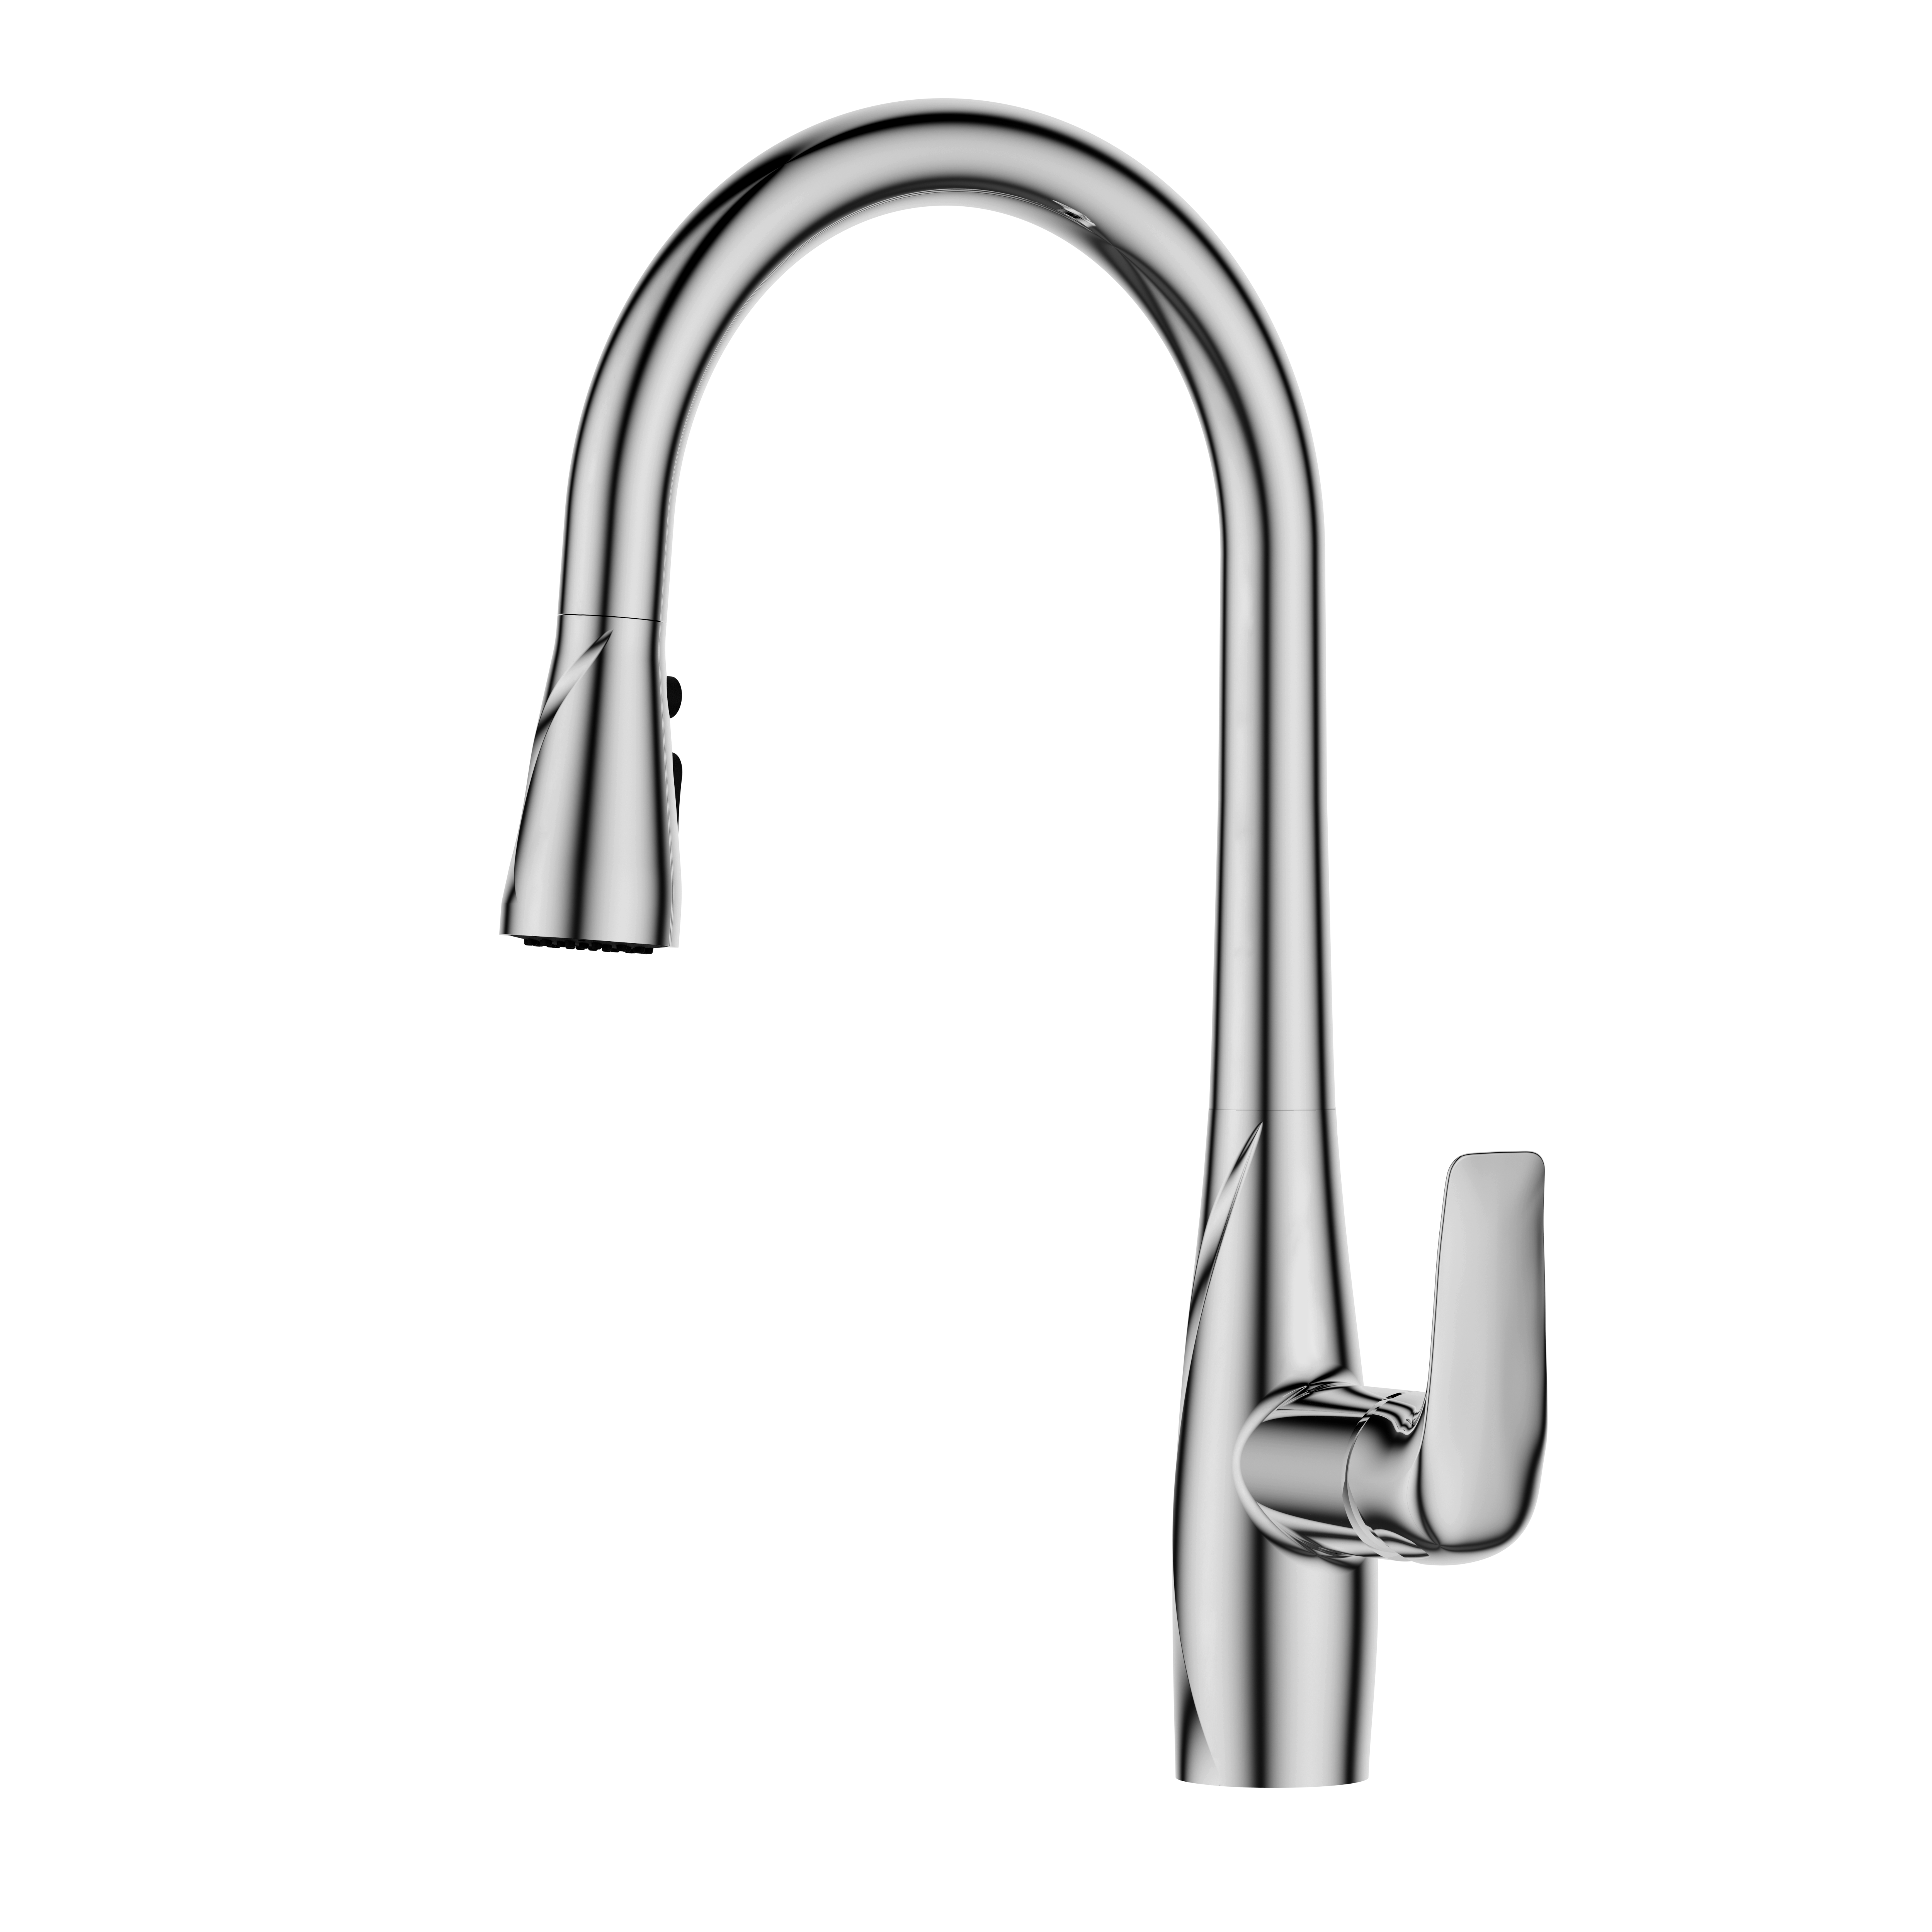 New Design Brass Material Pull Down Kitchen Faucet 